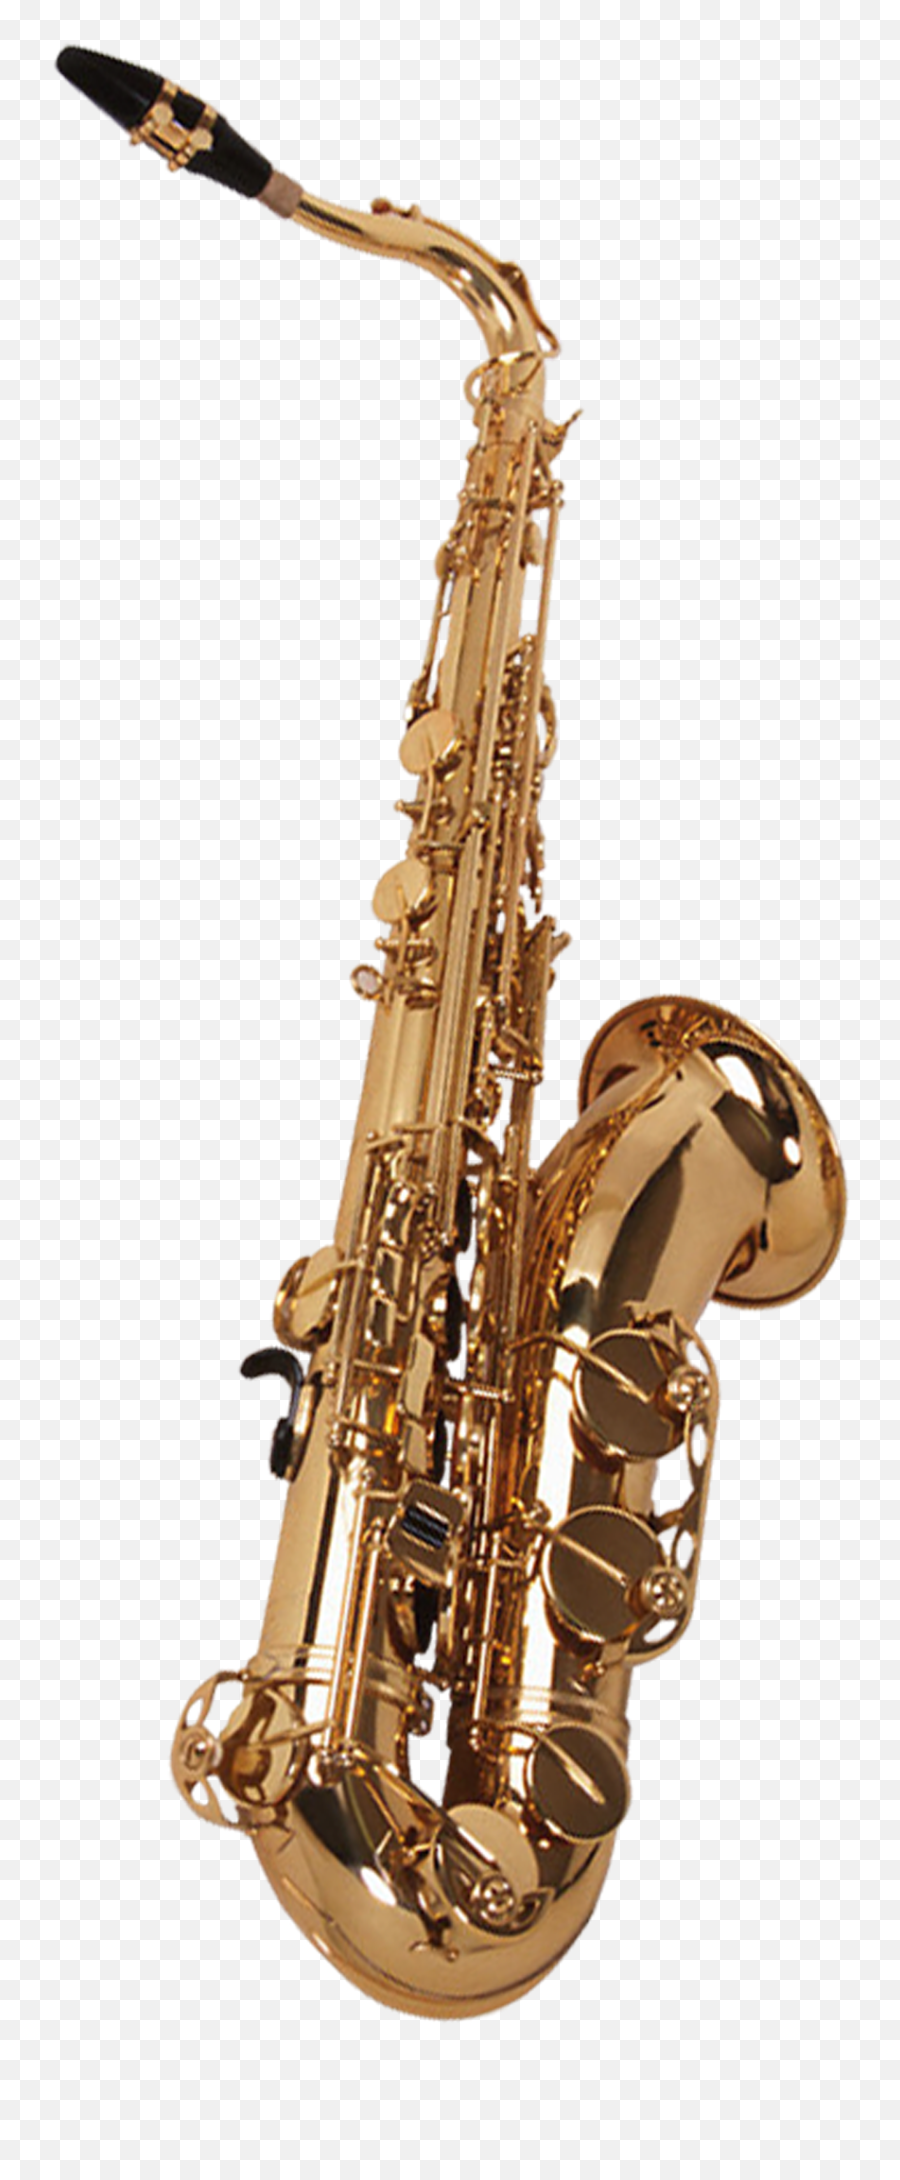 Pngs Sax Saxophone Saxophones - Saxophone Price Philippines Png,Saxaphone Png